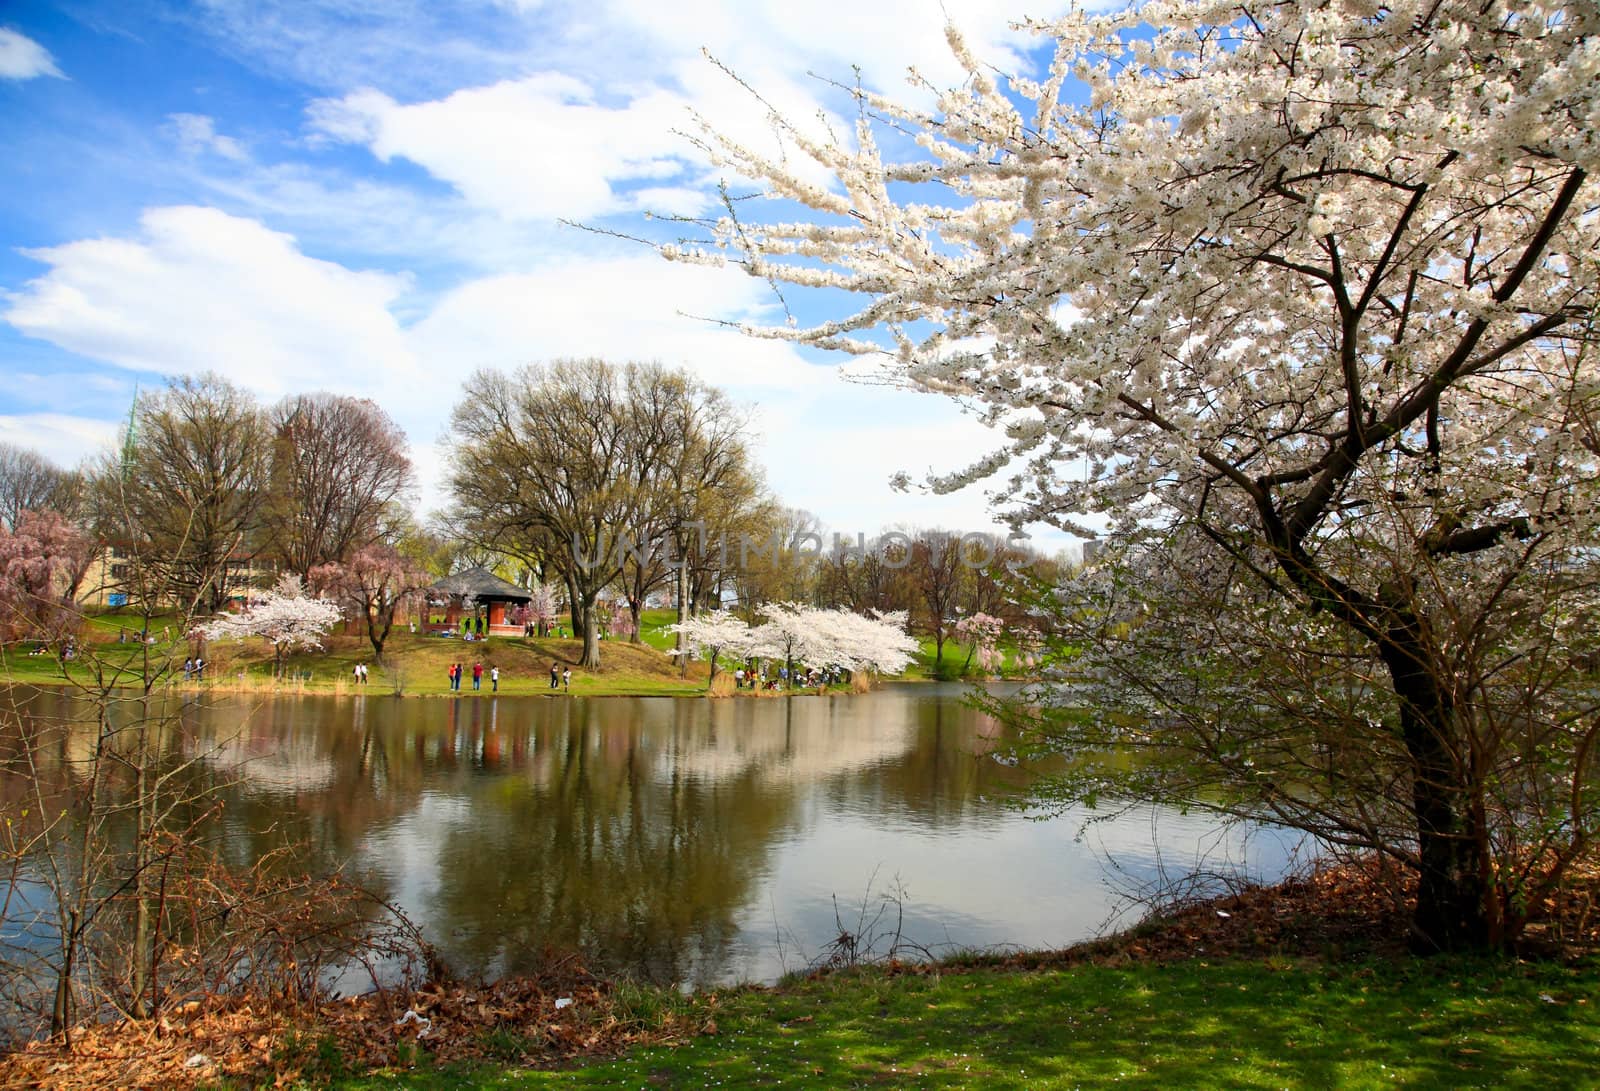 The Cherry Blossom Festival in Branch Brook Park New Jersey